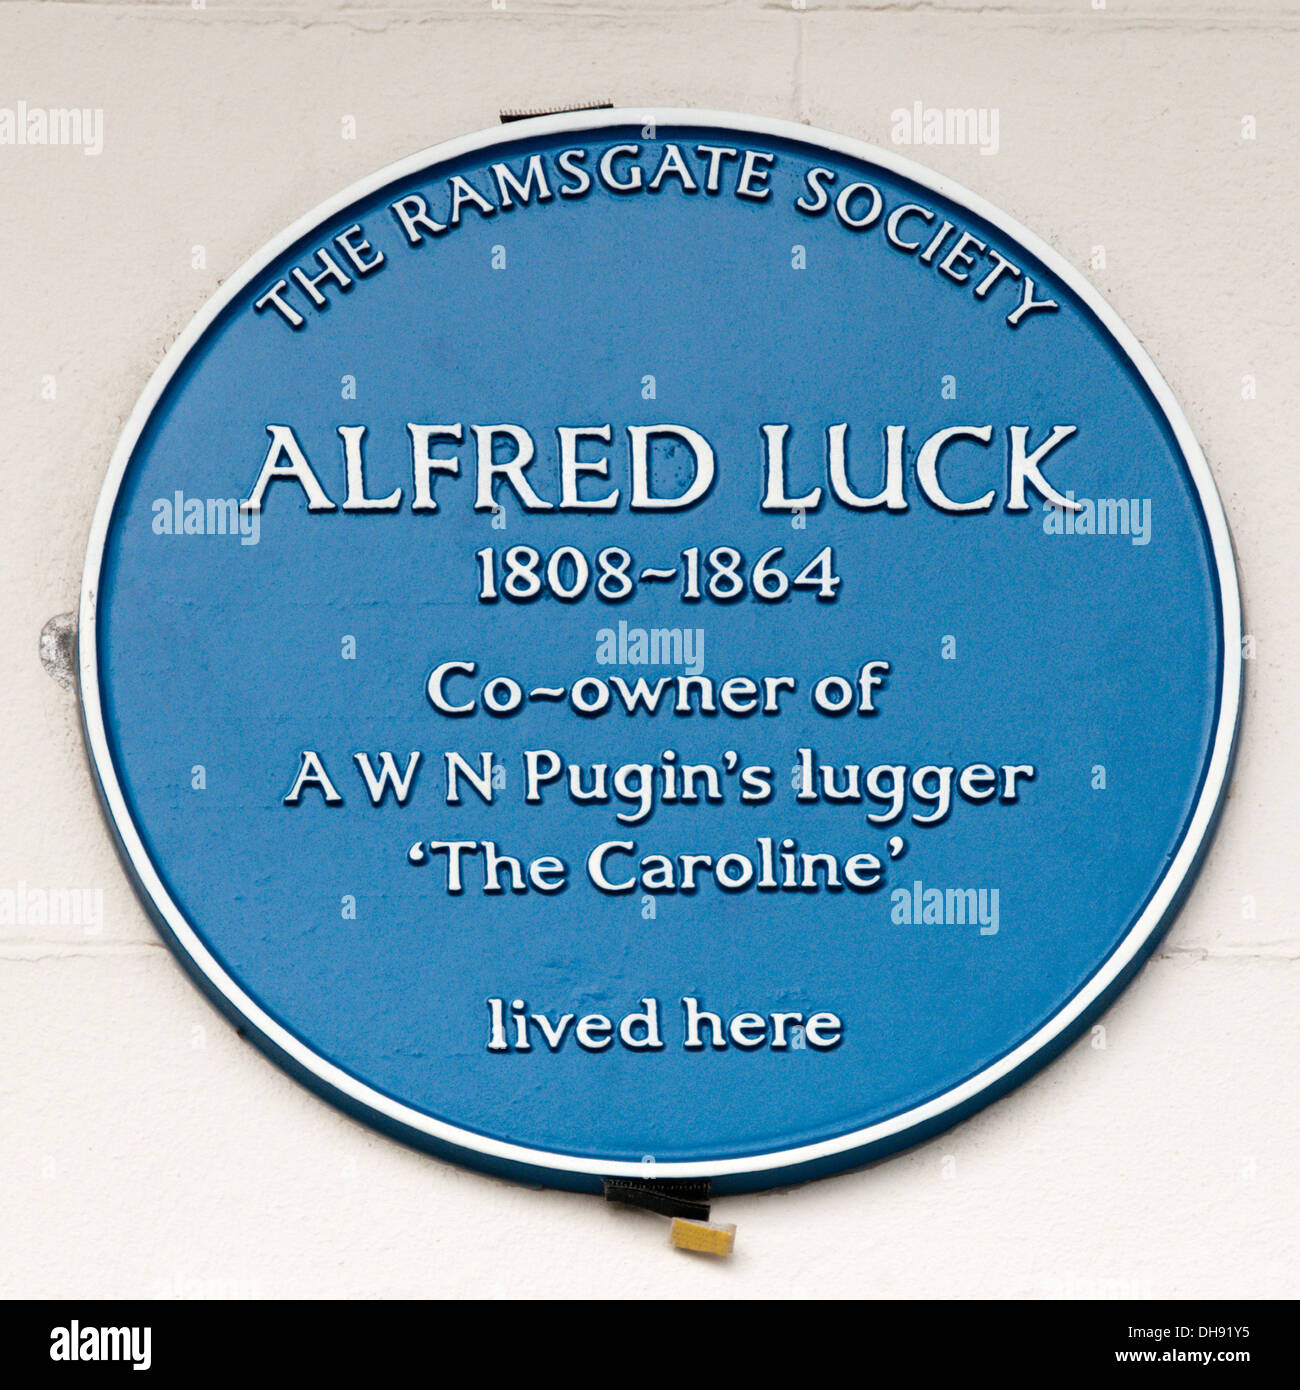 A blue plaque marks the house in Ramsgate lived in by Alfred Luck, a friend of A W N Pugin. Stock Photo